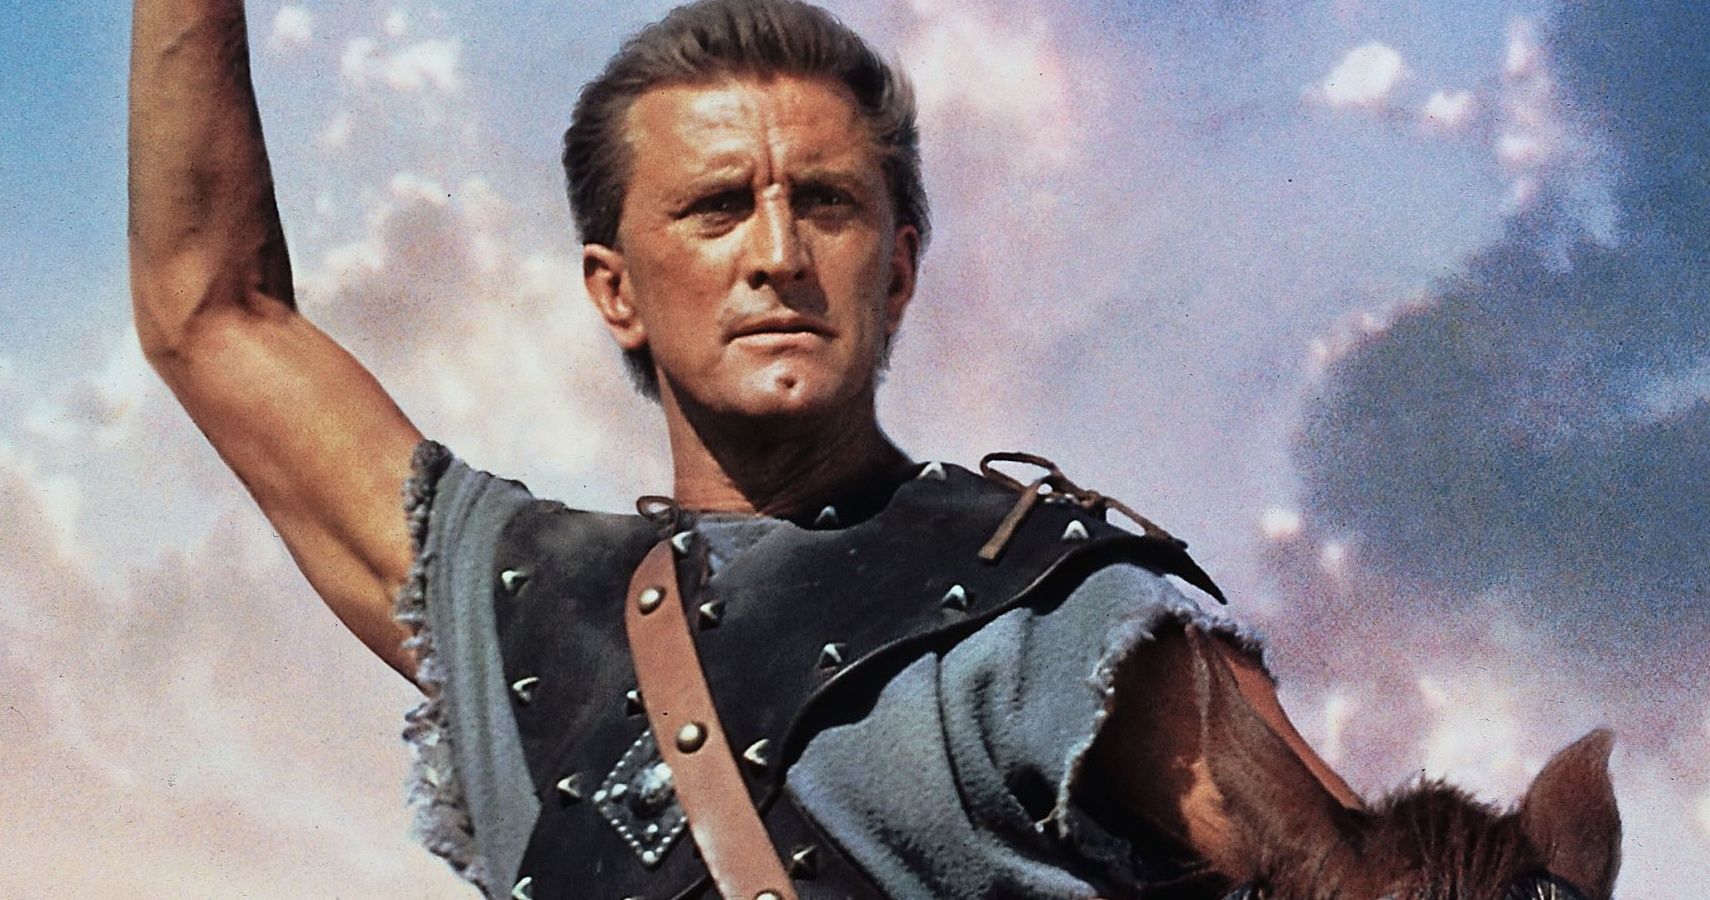 The 10 Most Unrealistic Movies About Ancient Wars